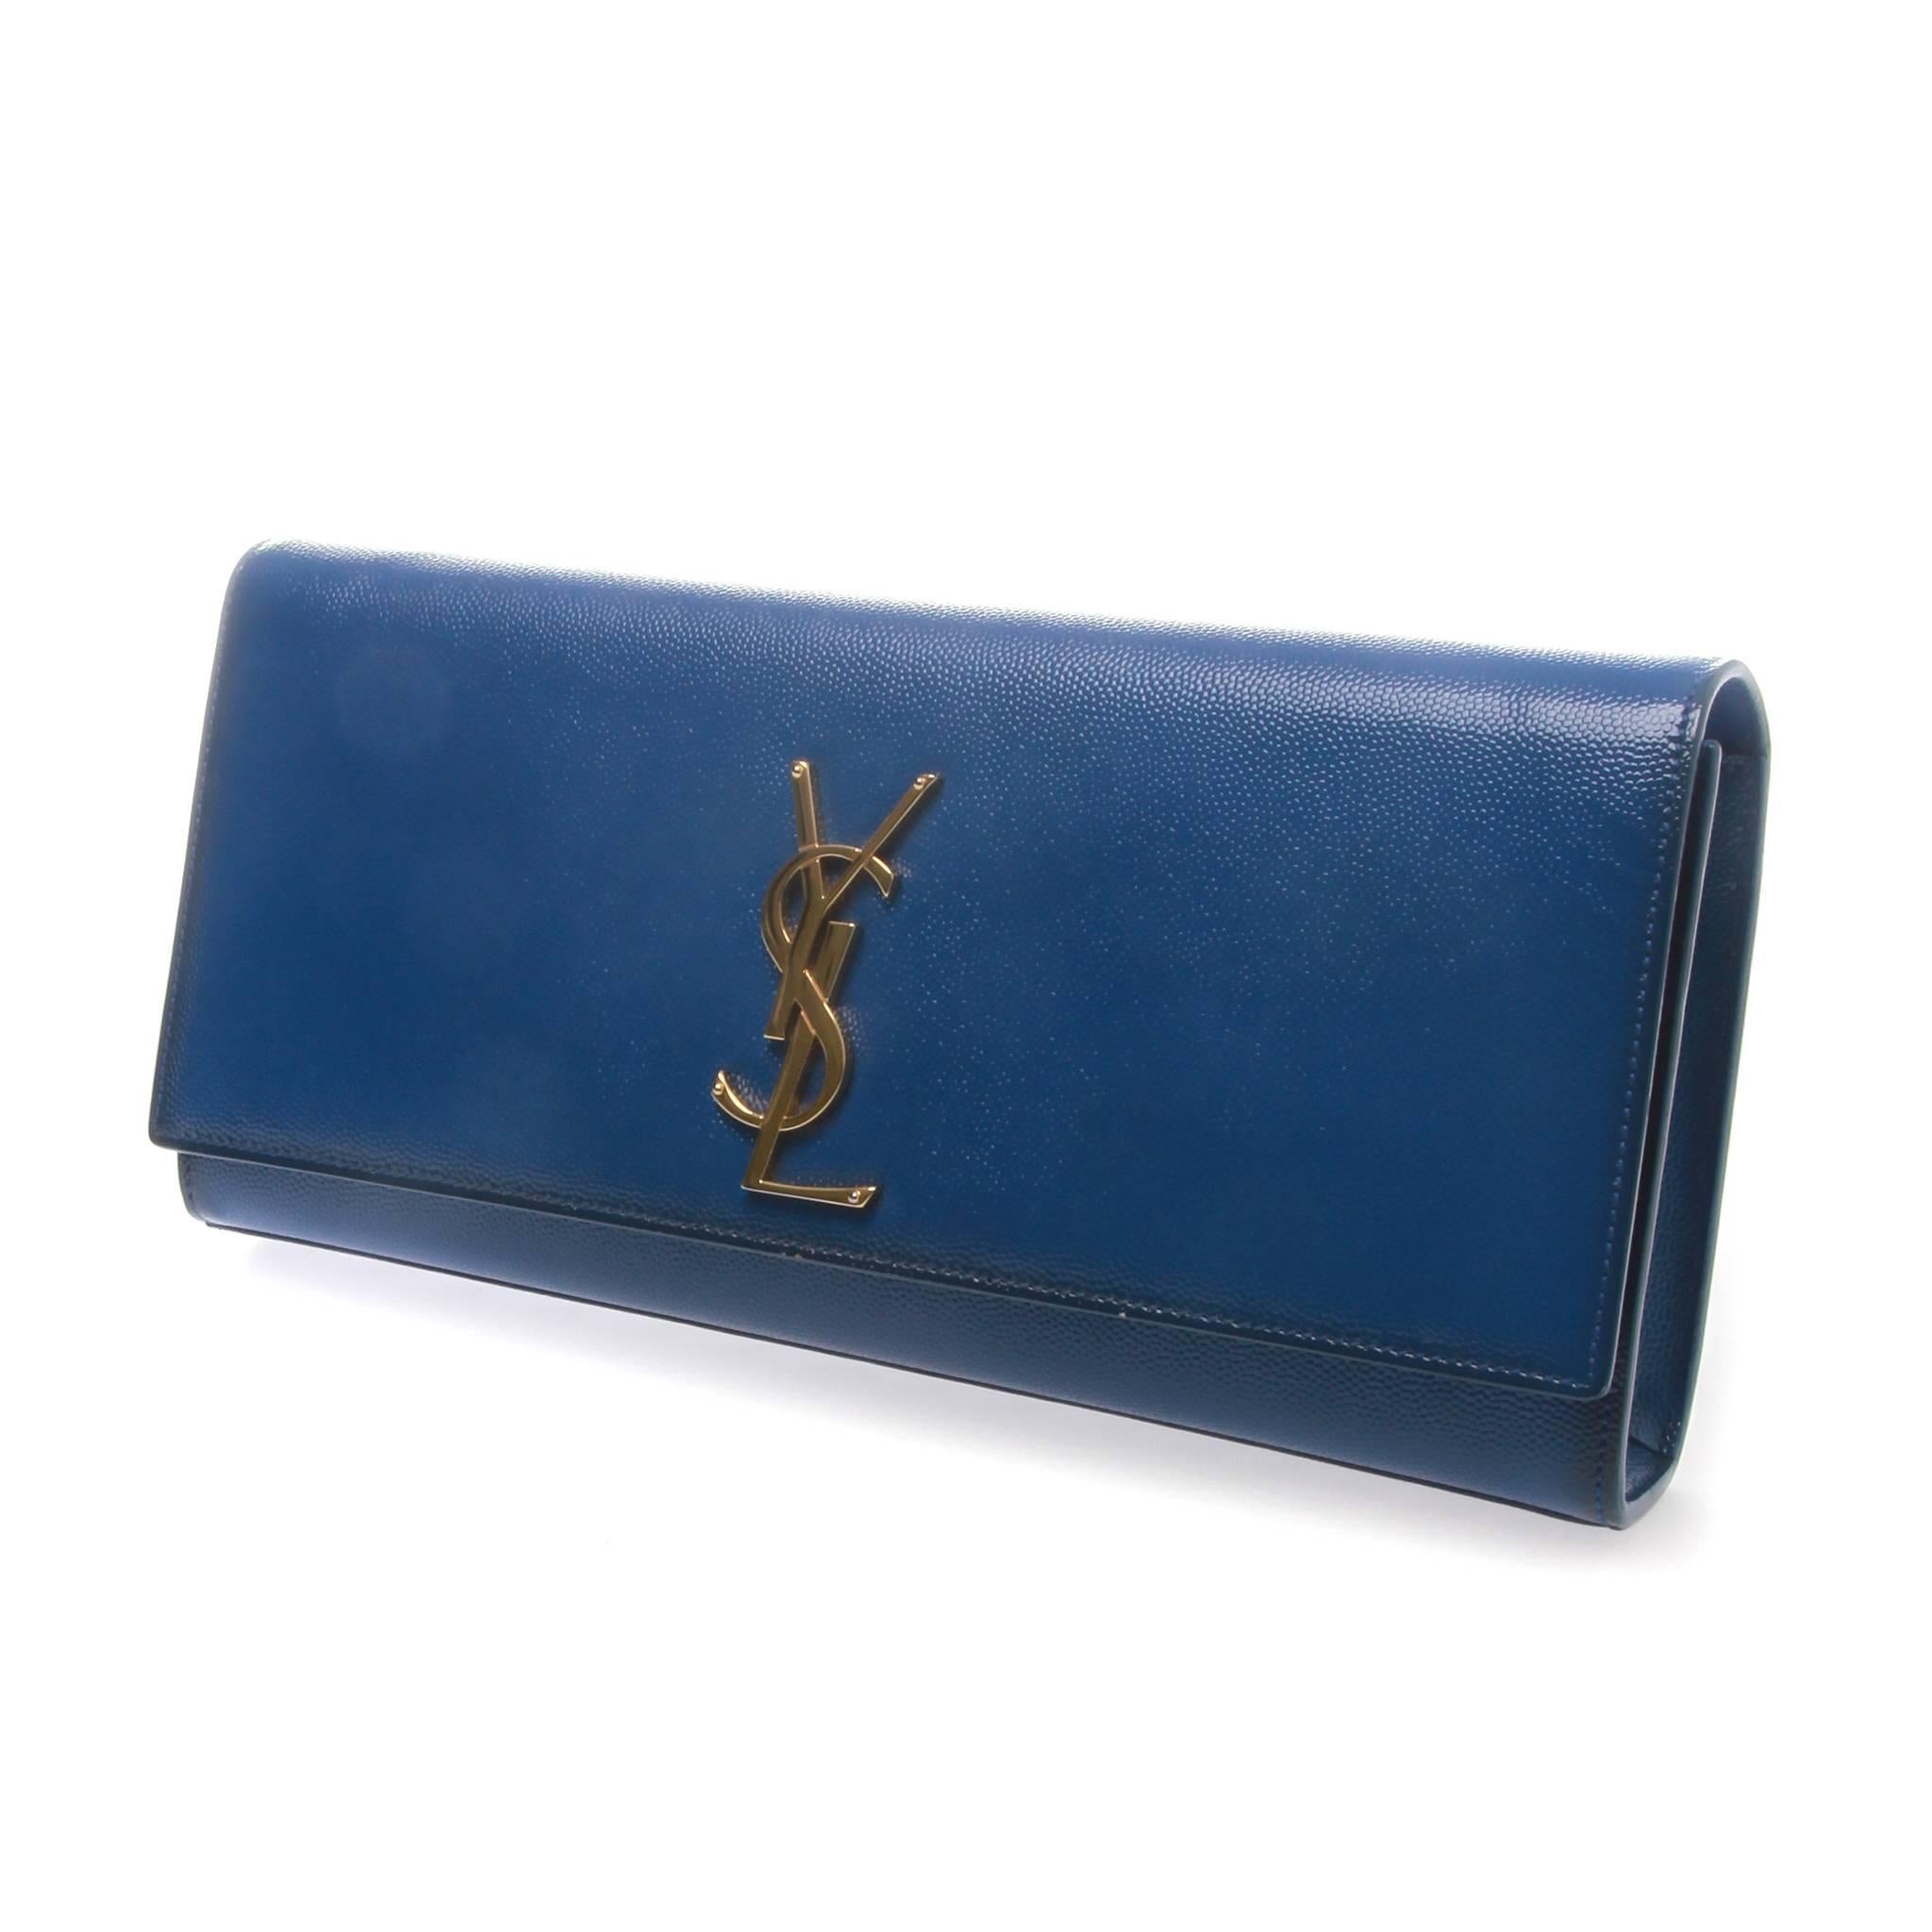 In a coveted Saint Laurent bag style, this electric blue rendition of the Cassandre clutch in a glossed cuir veau features a single main compartment with front flap closure. The monogram plaque features as centrepiece in gold-tone mental. This piece